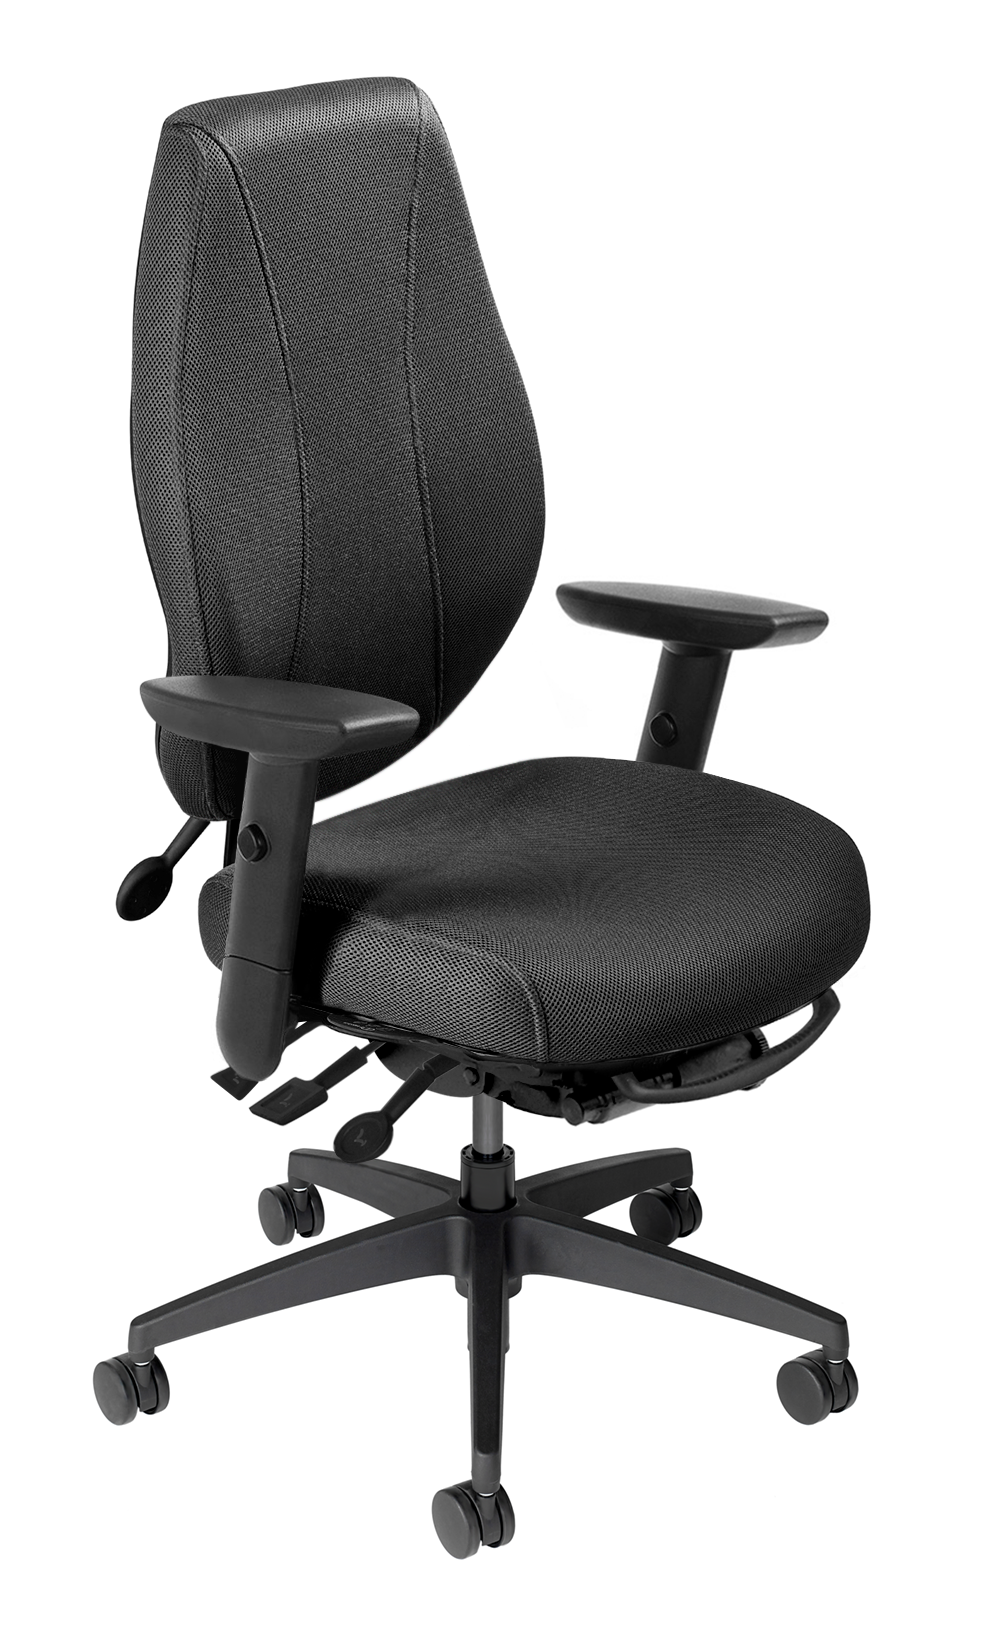 Second Hand Office Chairs Used Desk Mesh Chairs